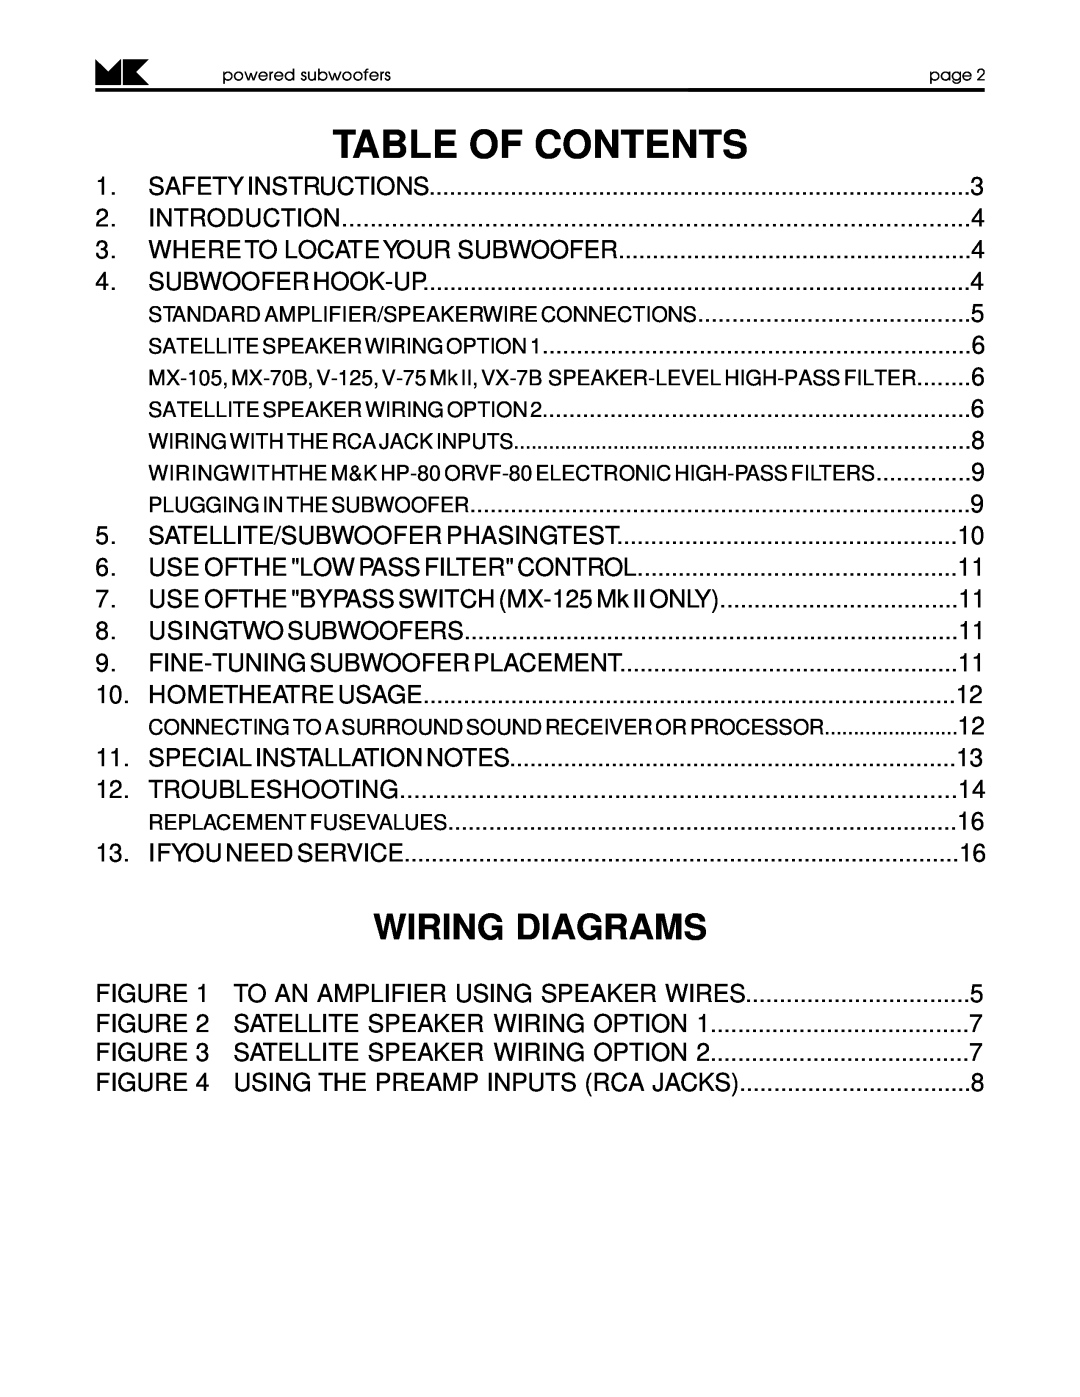 MK Sound MX-125 MK II, V-75 MK II, V-125, VX-7 MK II operation manual Table Of Contents, Wiring Diagrams 